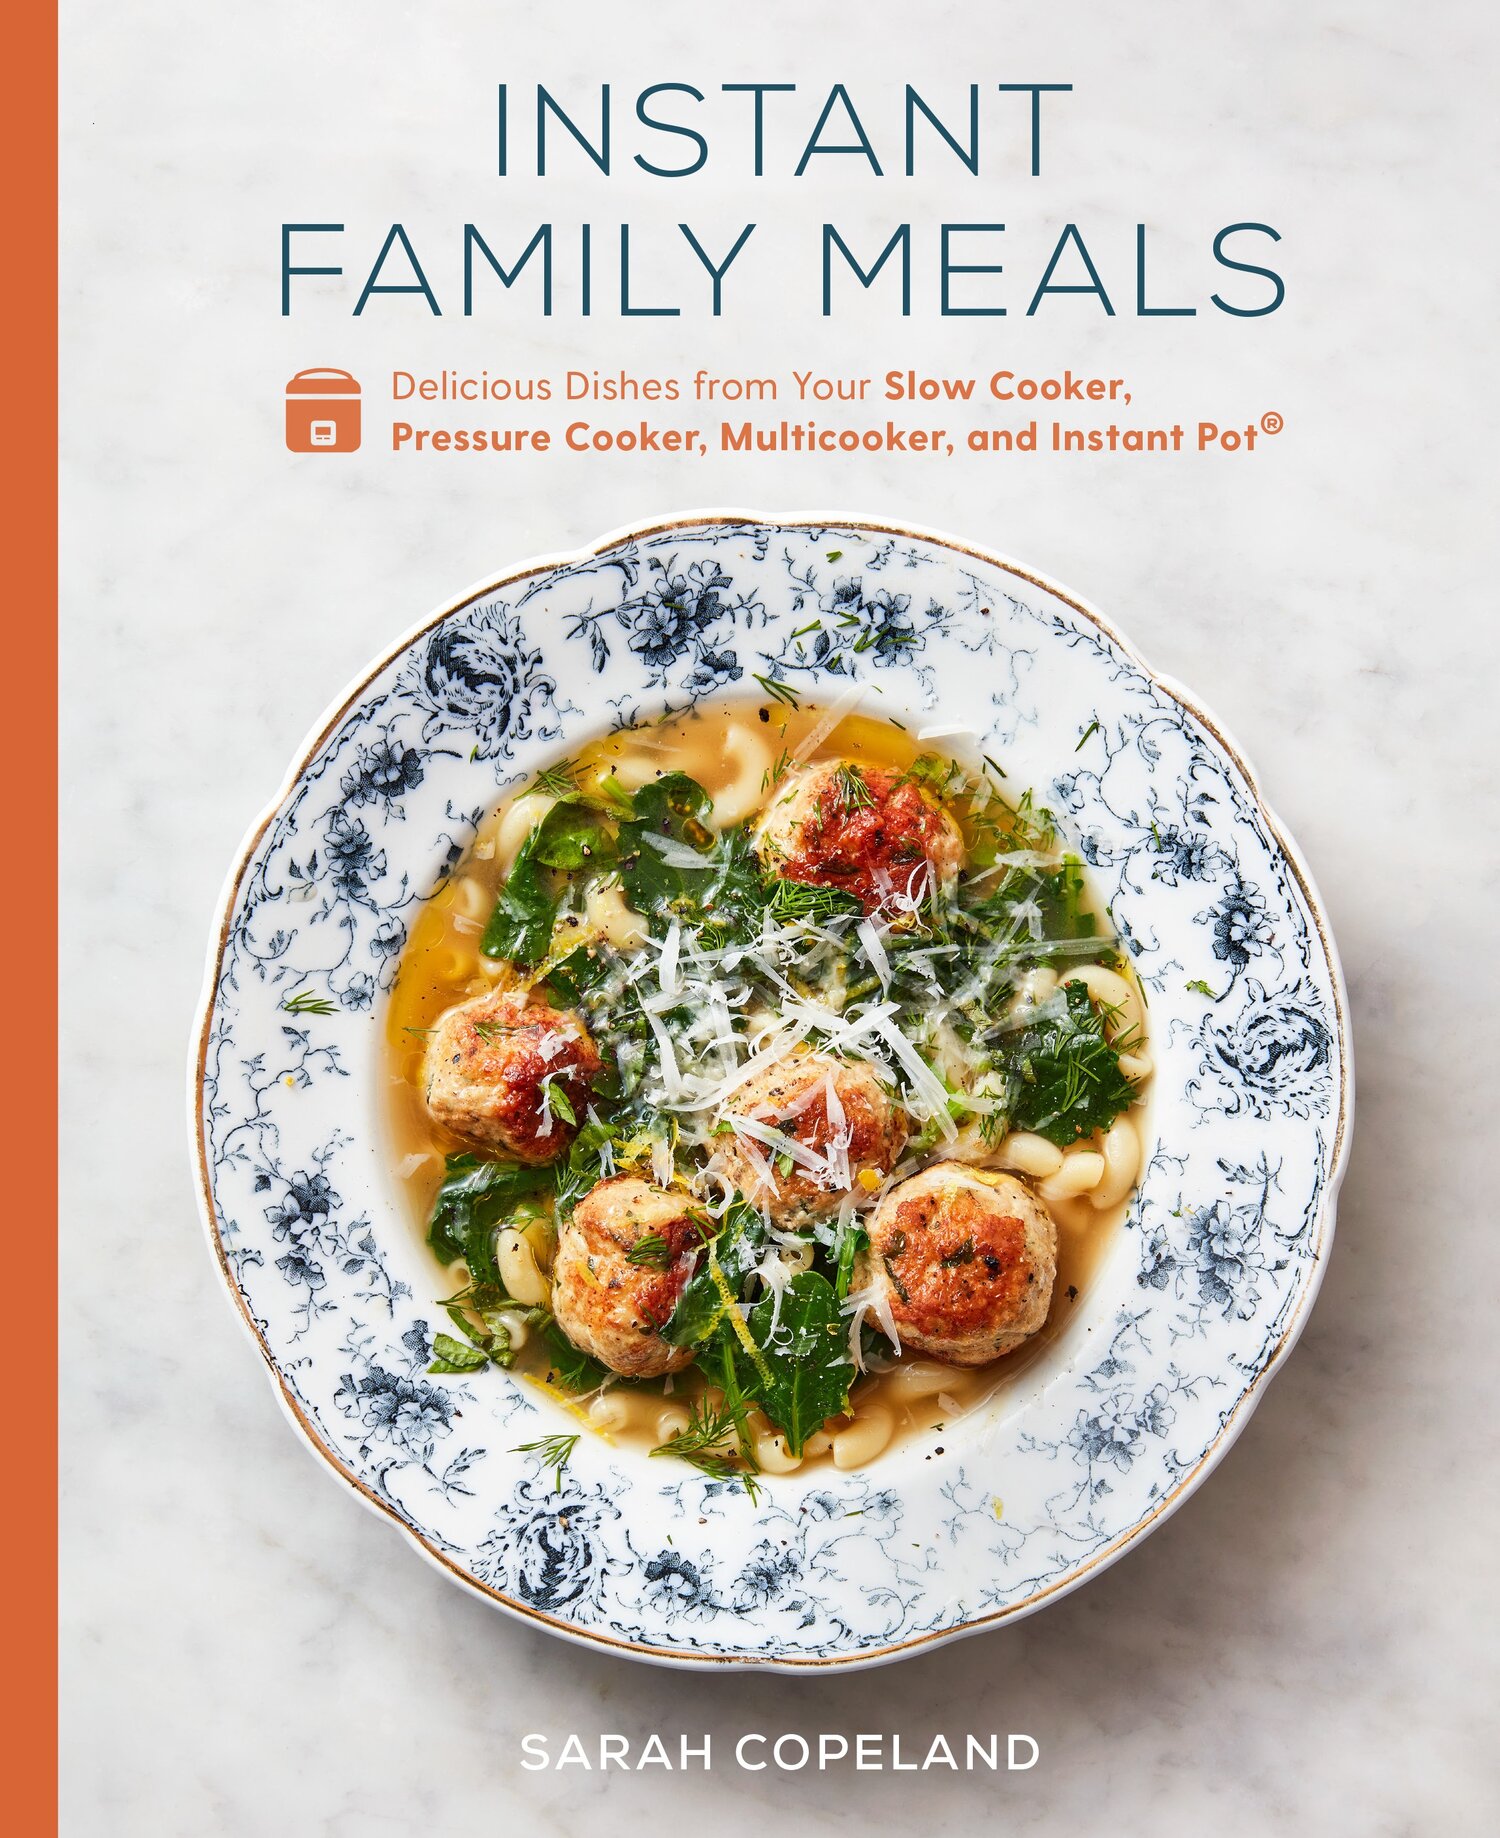 Simply Delicious and Easy One Pot Meals - Family Fresh Meals